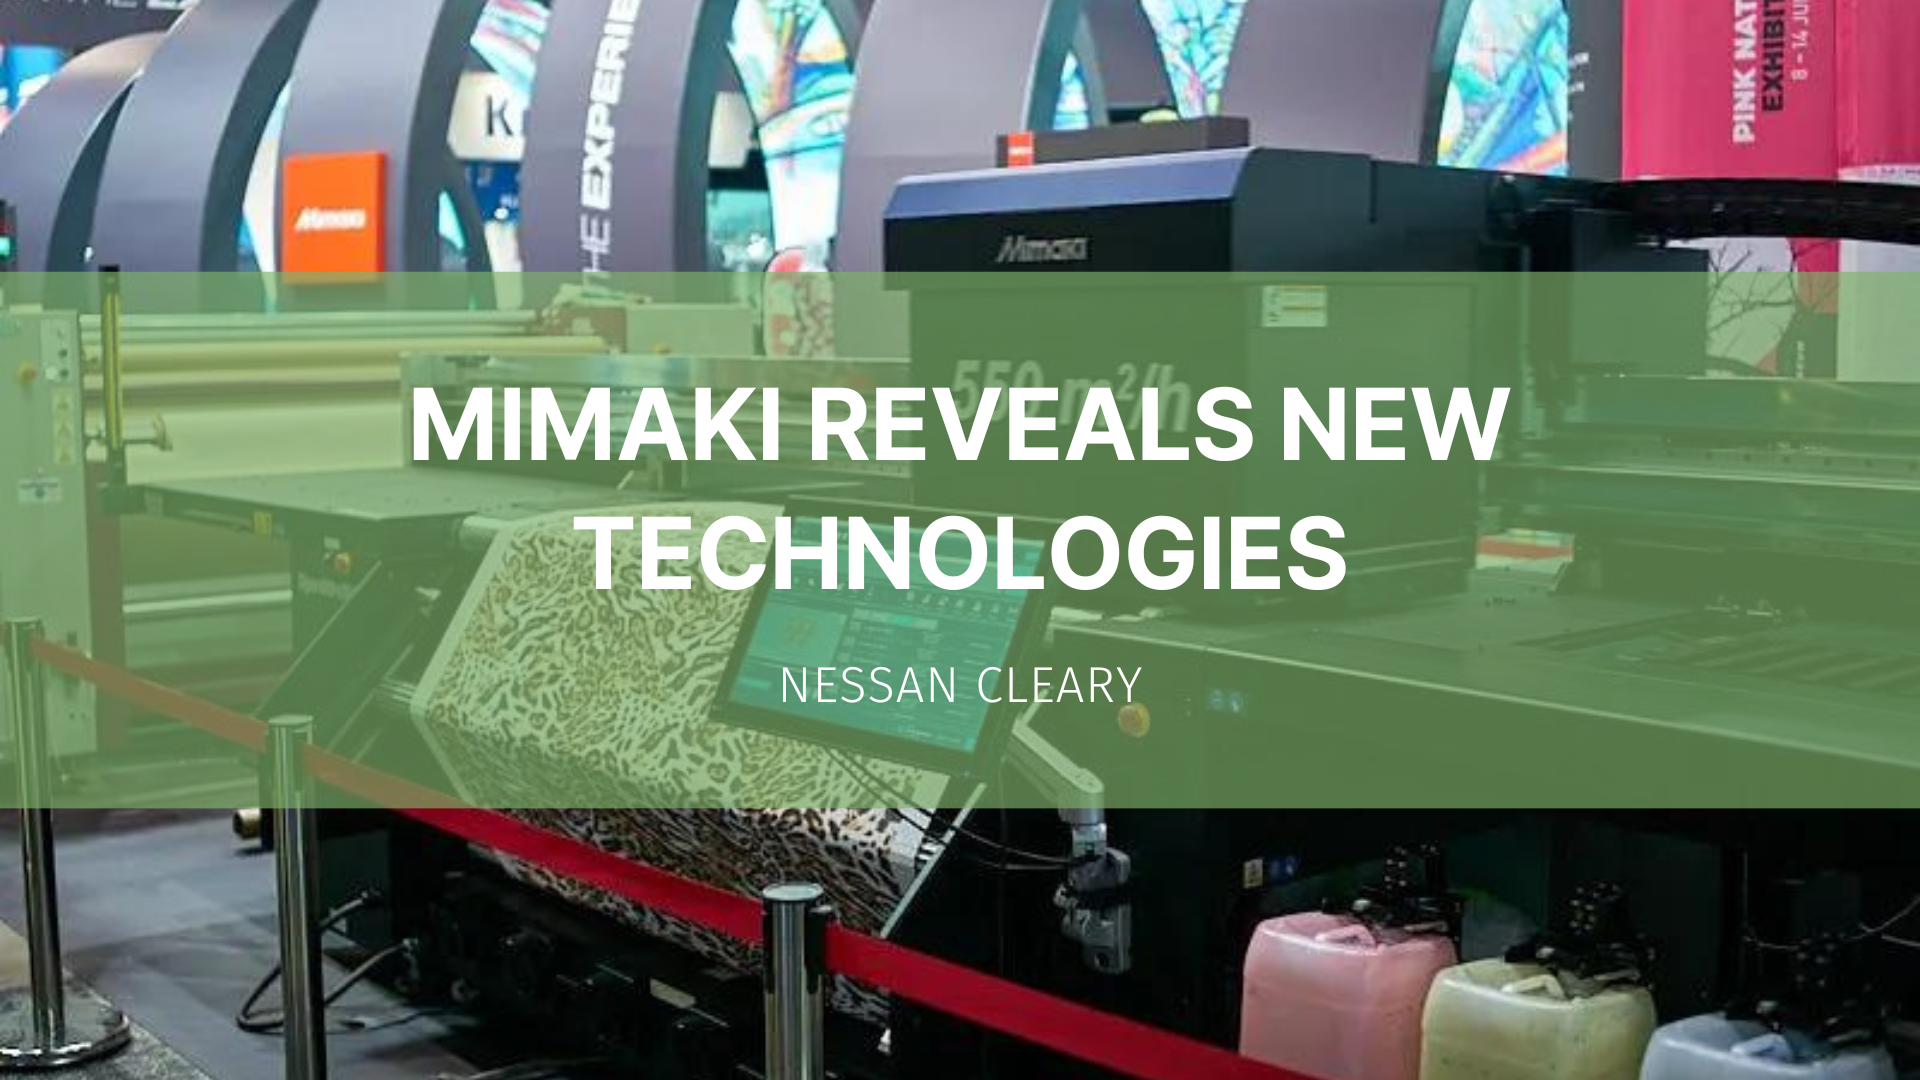 Featured image for “Mimaki reveals new technologies”